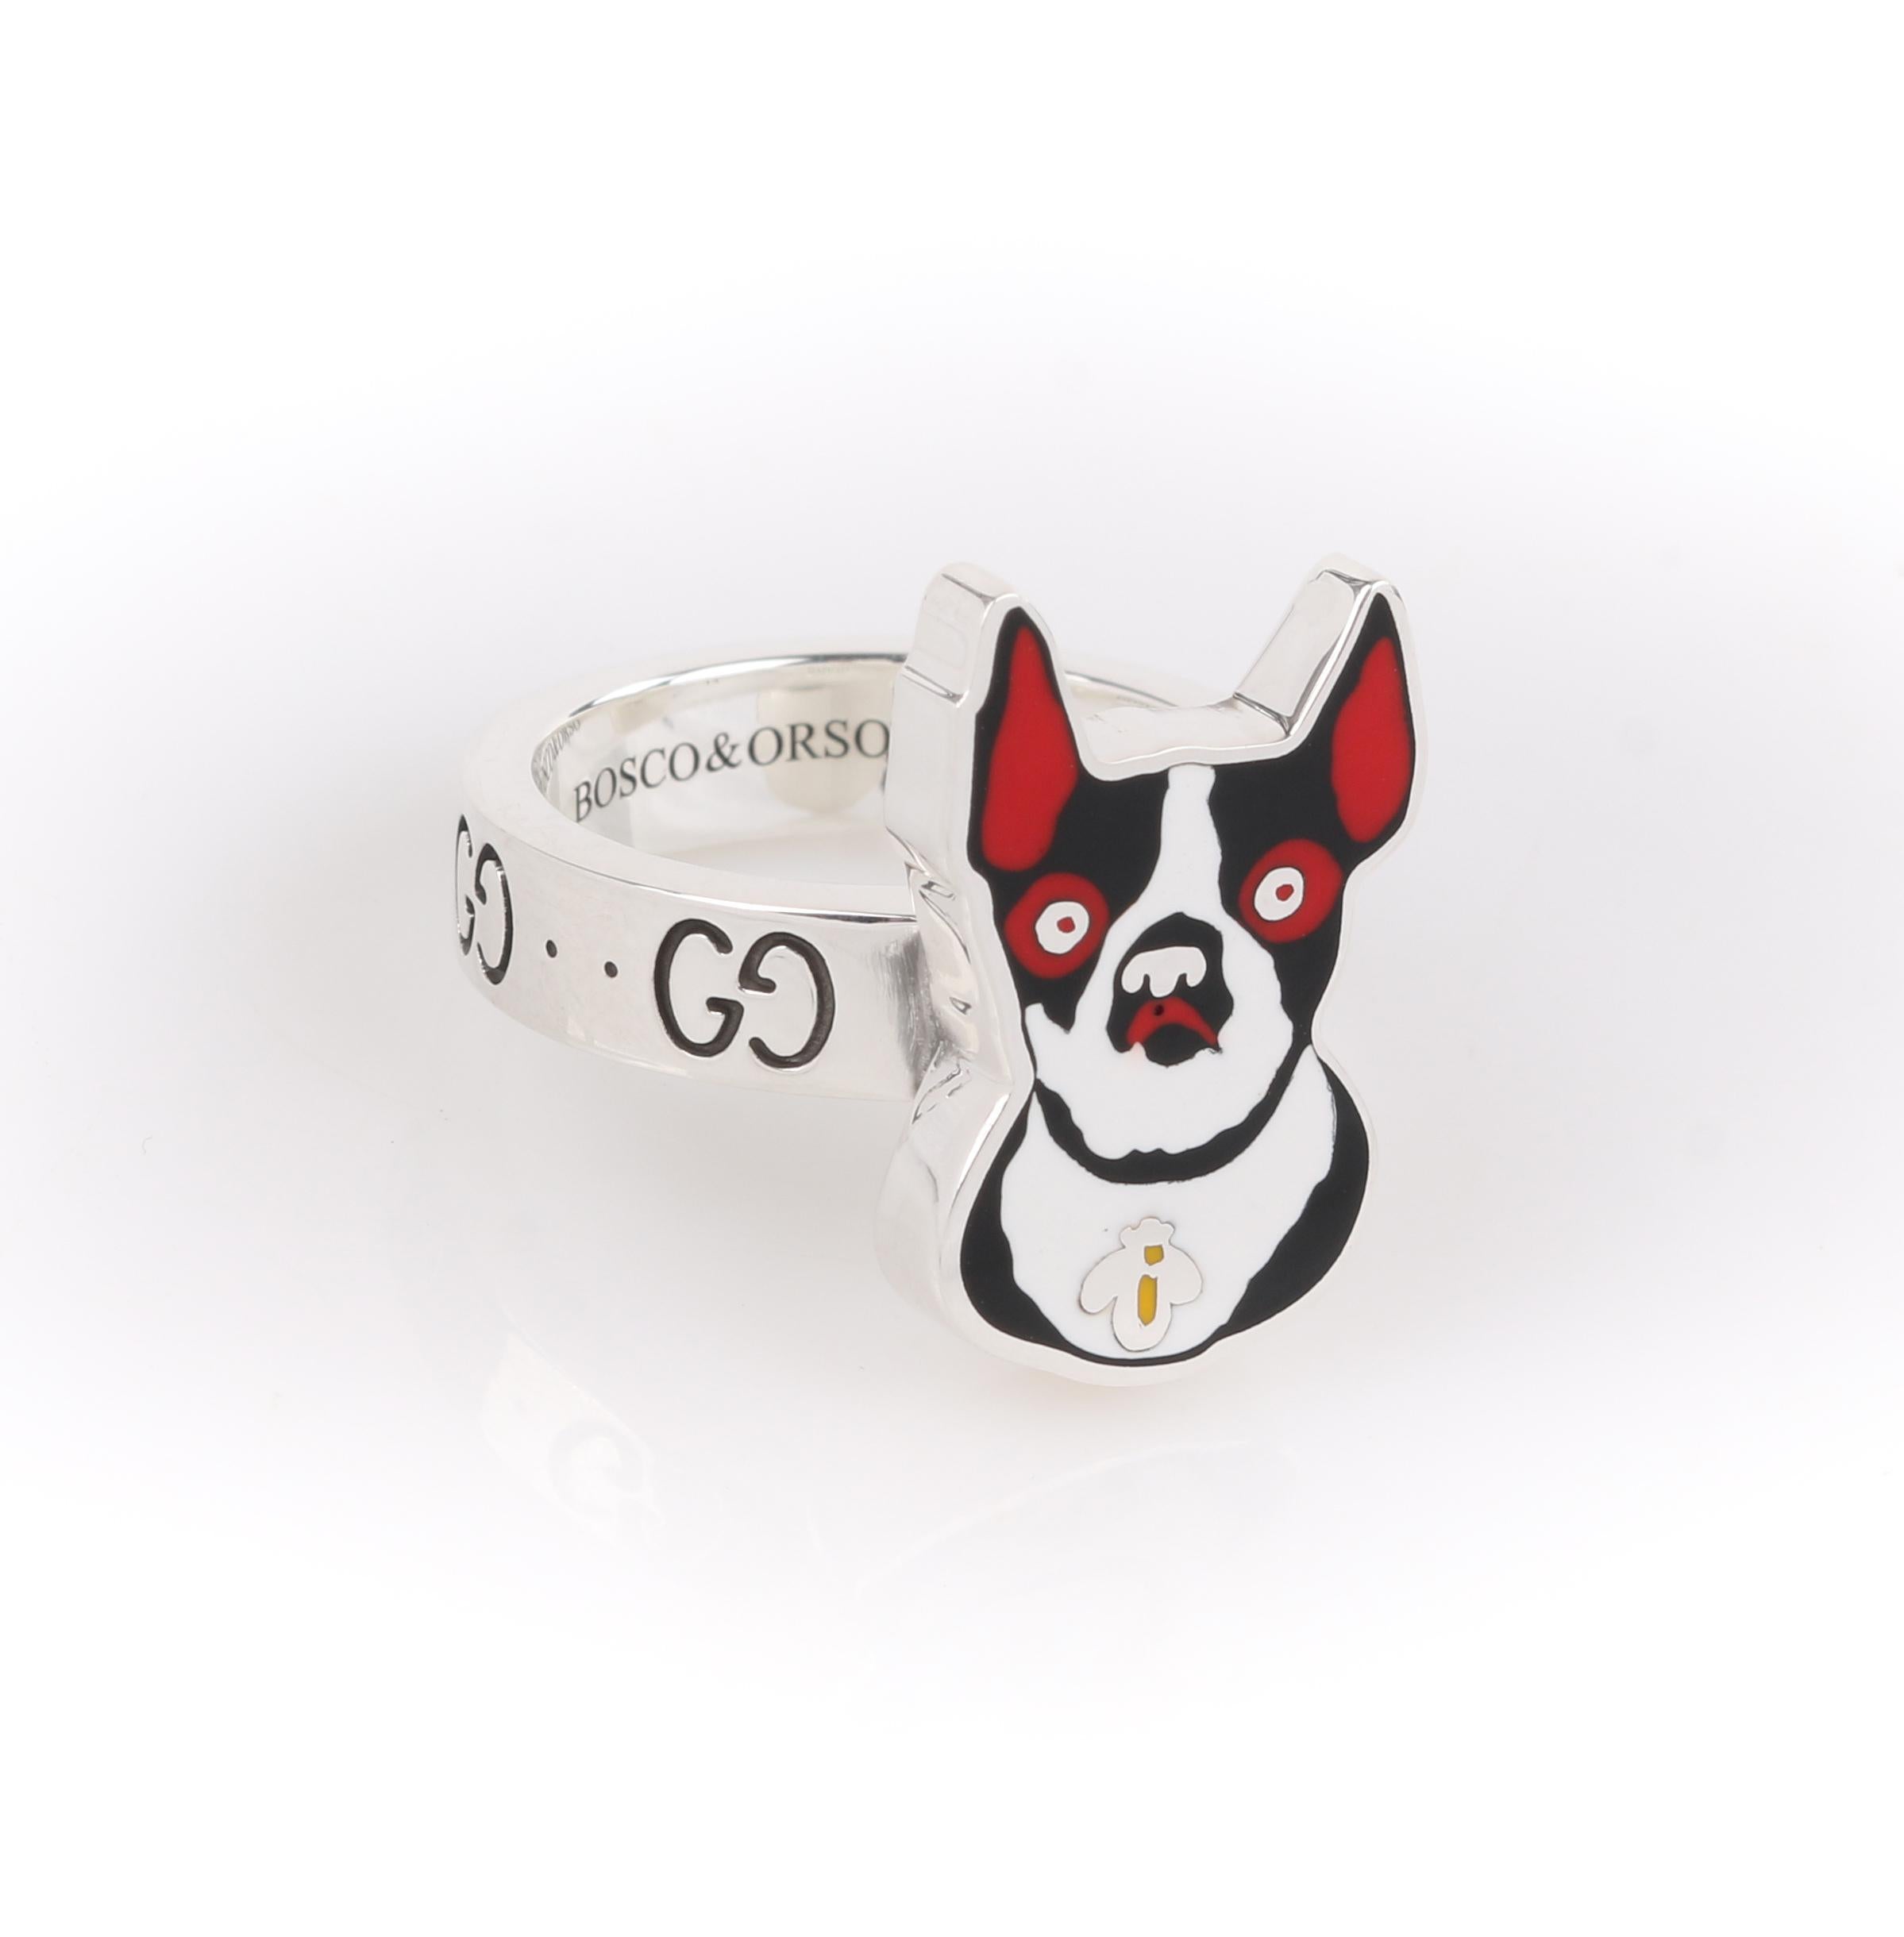 Gucci Dog - 4 For Sale on 1stDibs | gucci for dogs, gucci dog 